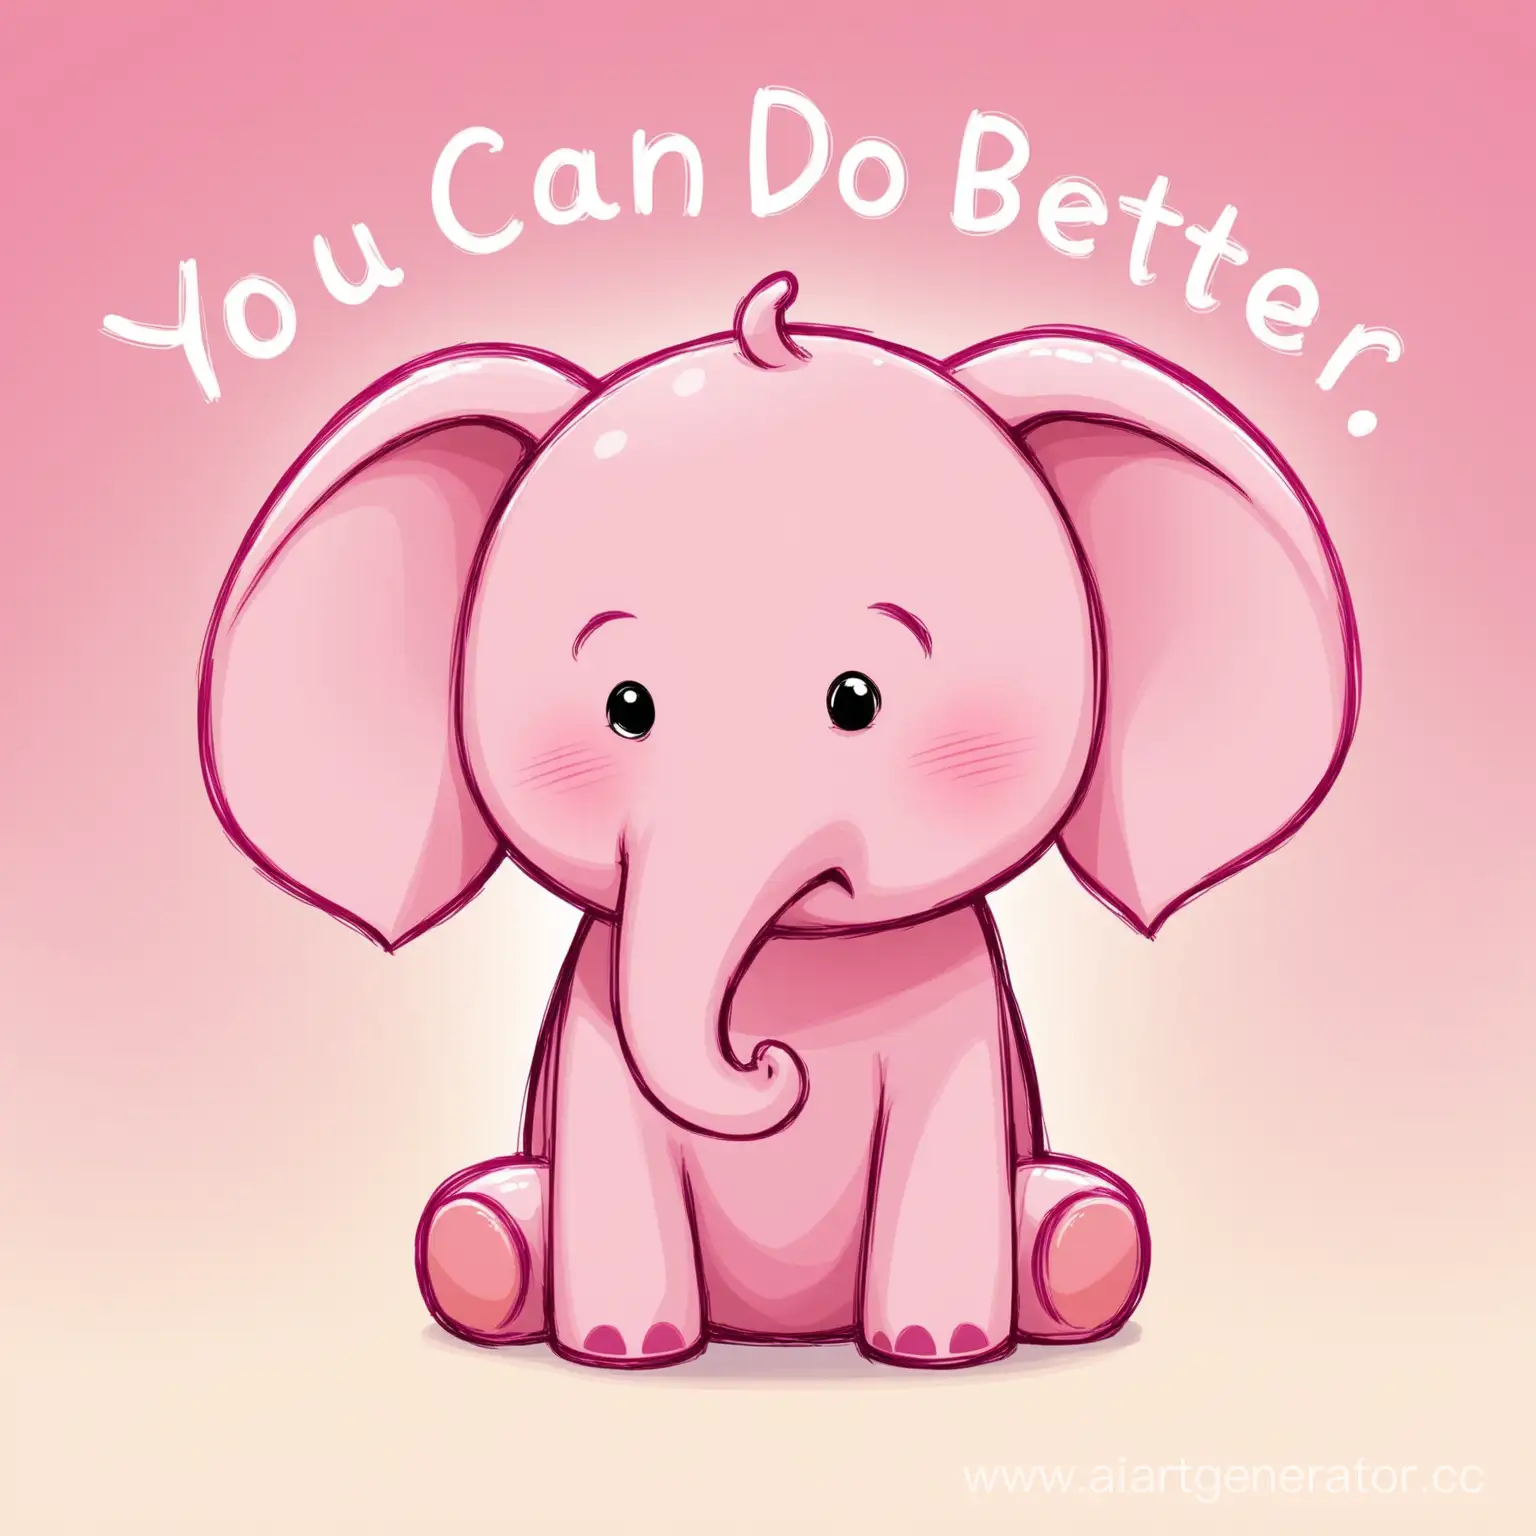 Encouraging-Pink-Elephant-with-Motivational-Sign